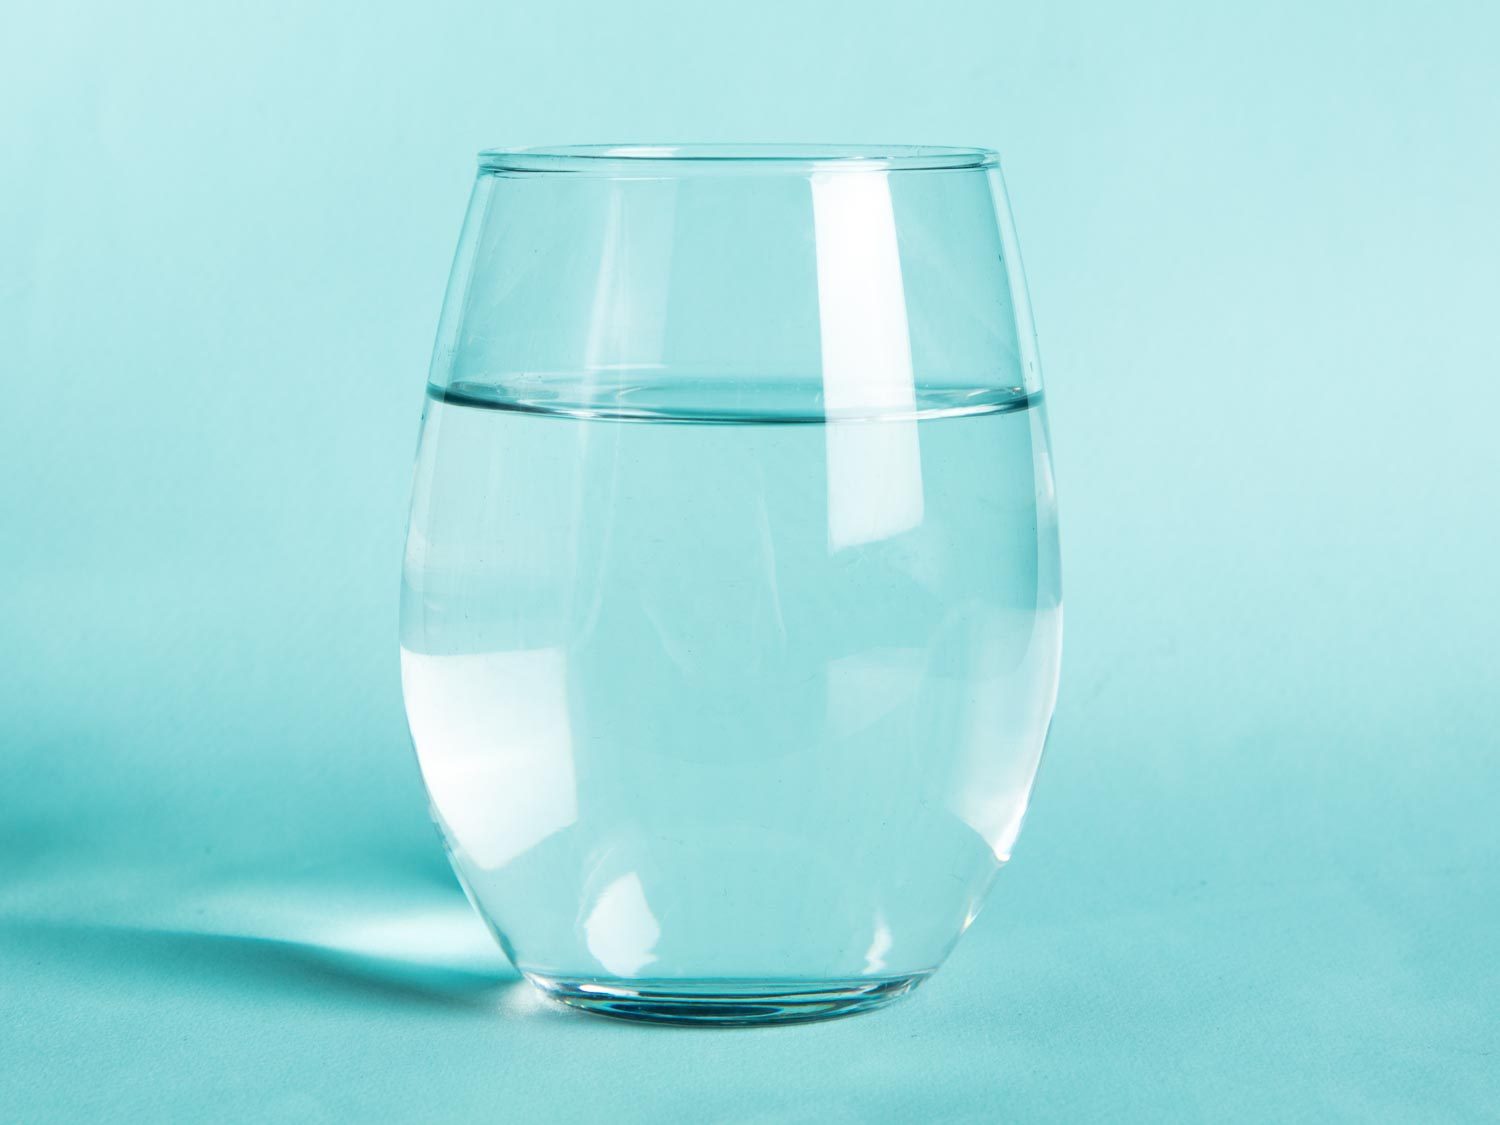 A glass of water against an aqua background